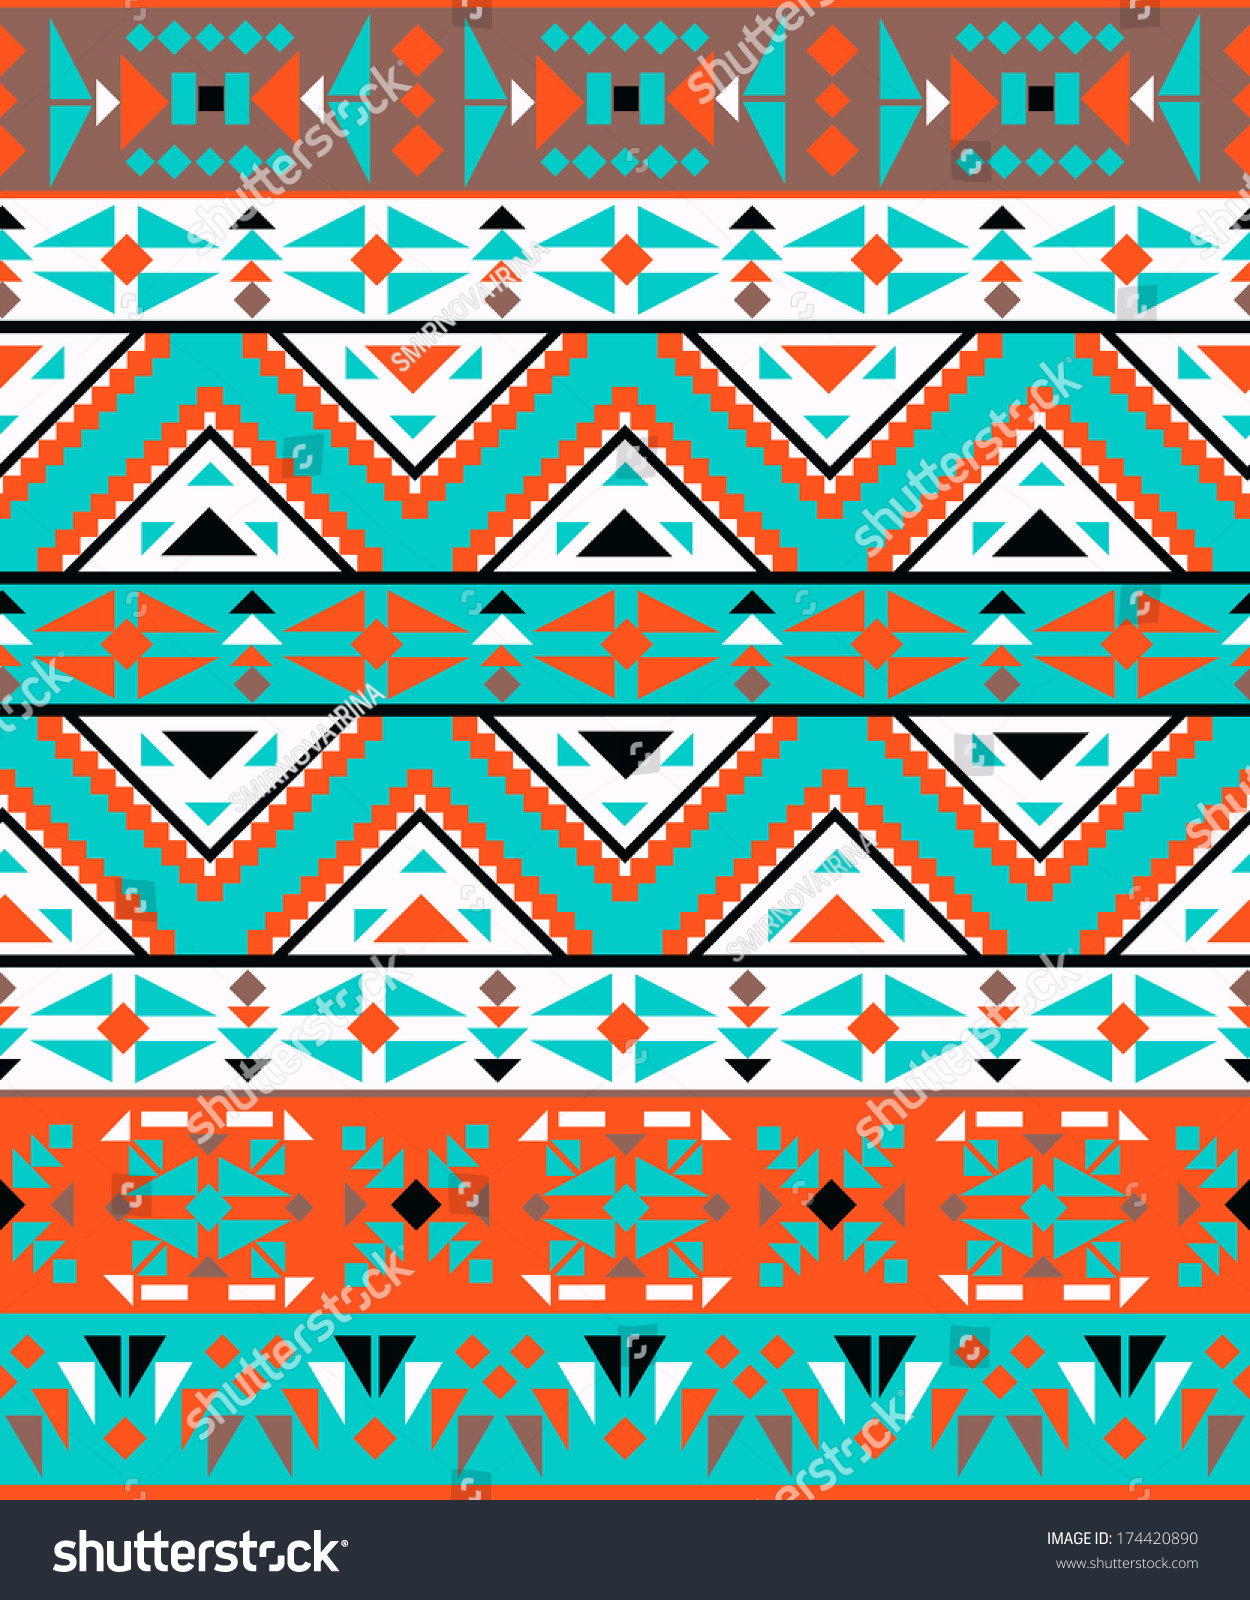 Seamless Colorful Aztec Pattern Stock Vector 174420890 - Shutterstock